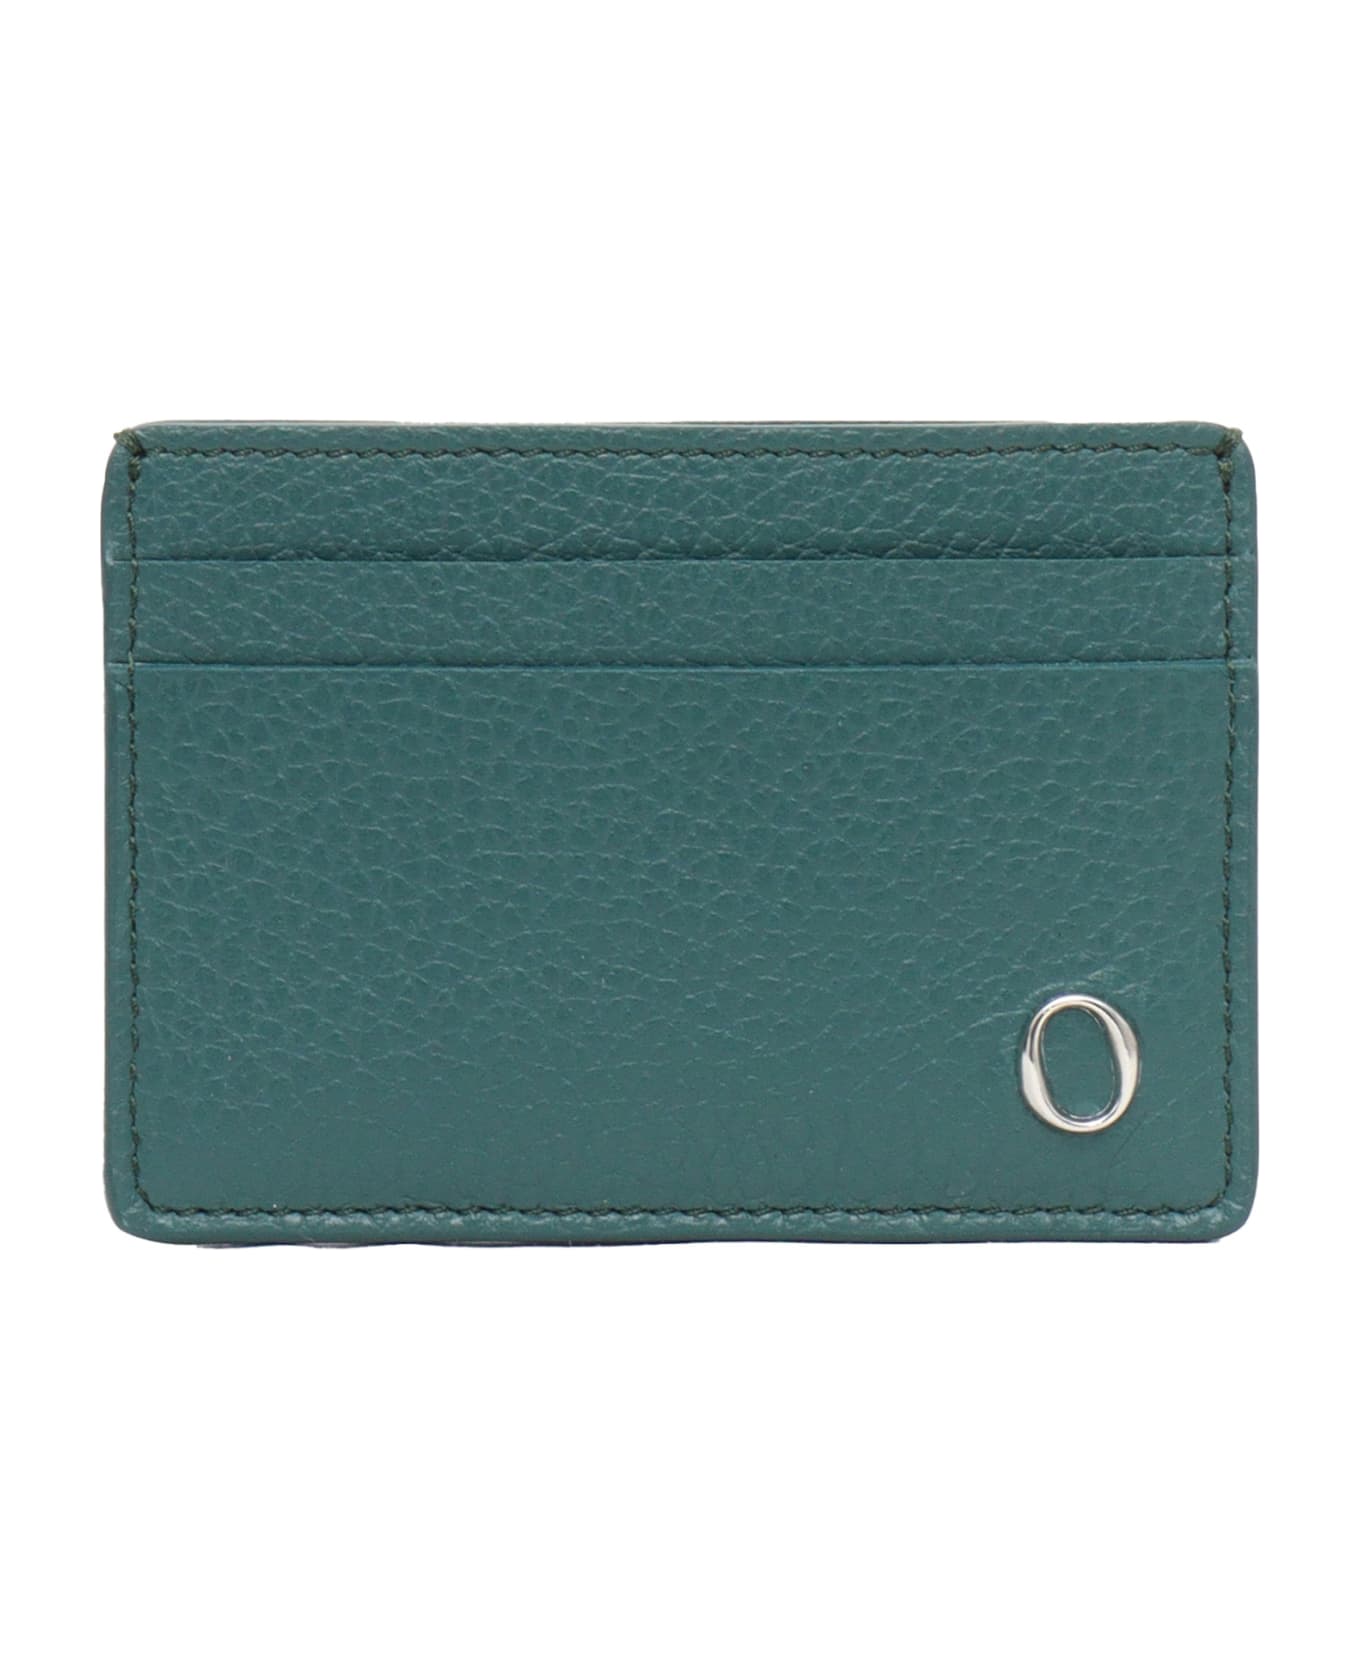 Orciani Green Wallet - BROWN